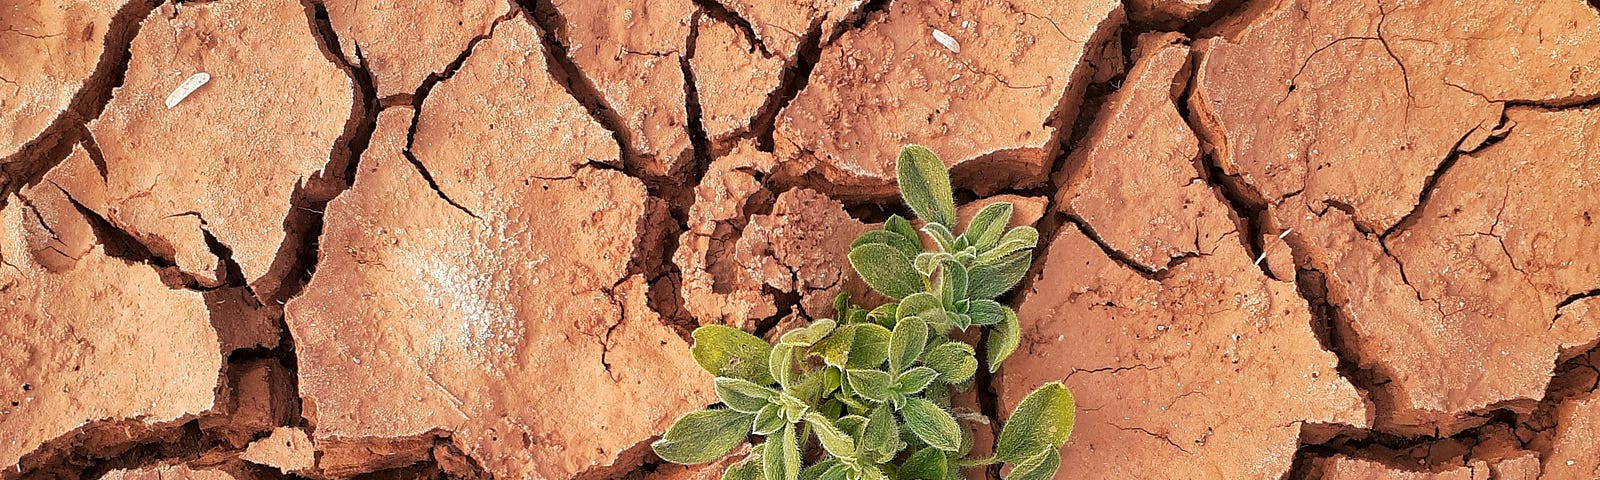 Plants growing in dry, cracked soil